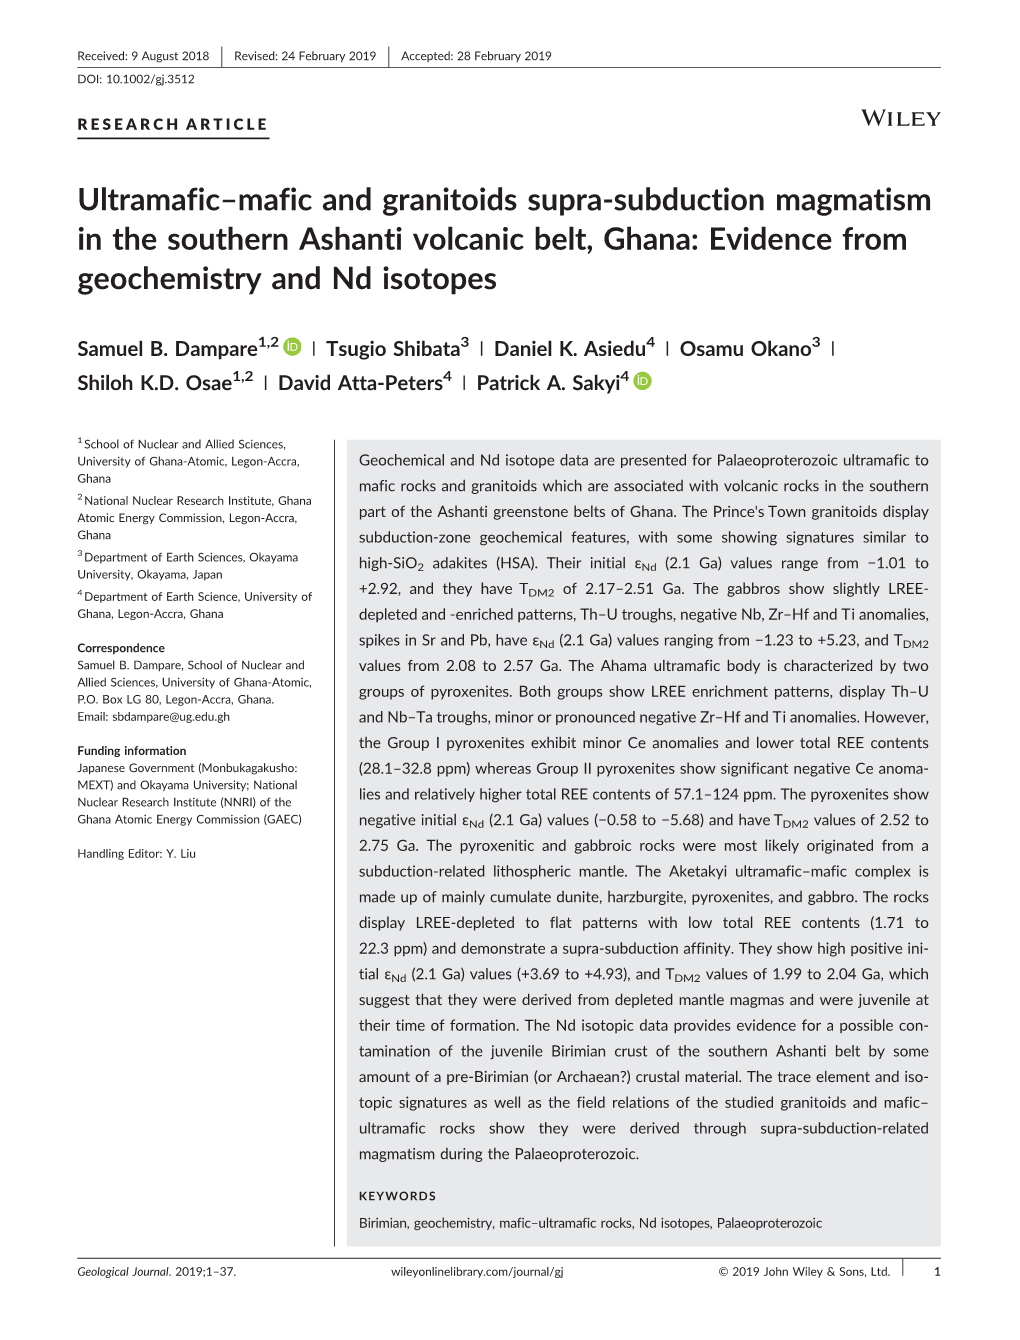 Ultramafic–Mafic and Granitoids Supra‐Subduction Magmatism in the Southern Ashanti Volcanic Belt, Ghana: Evidence from Geochemistry and Nd Isotopes